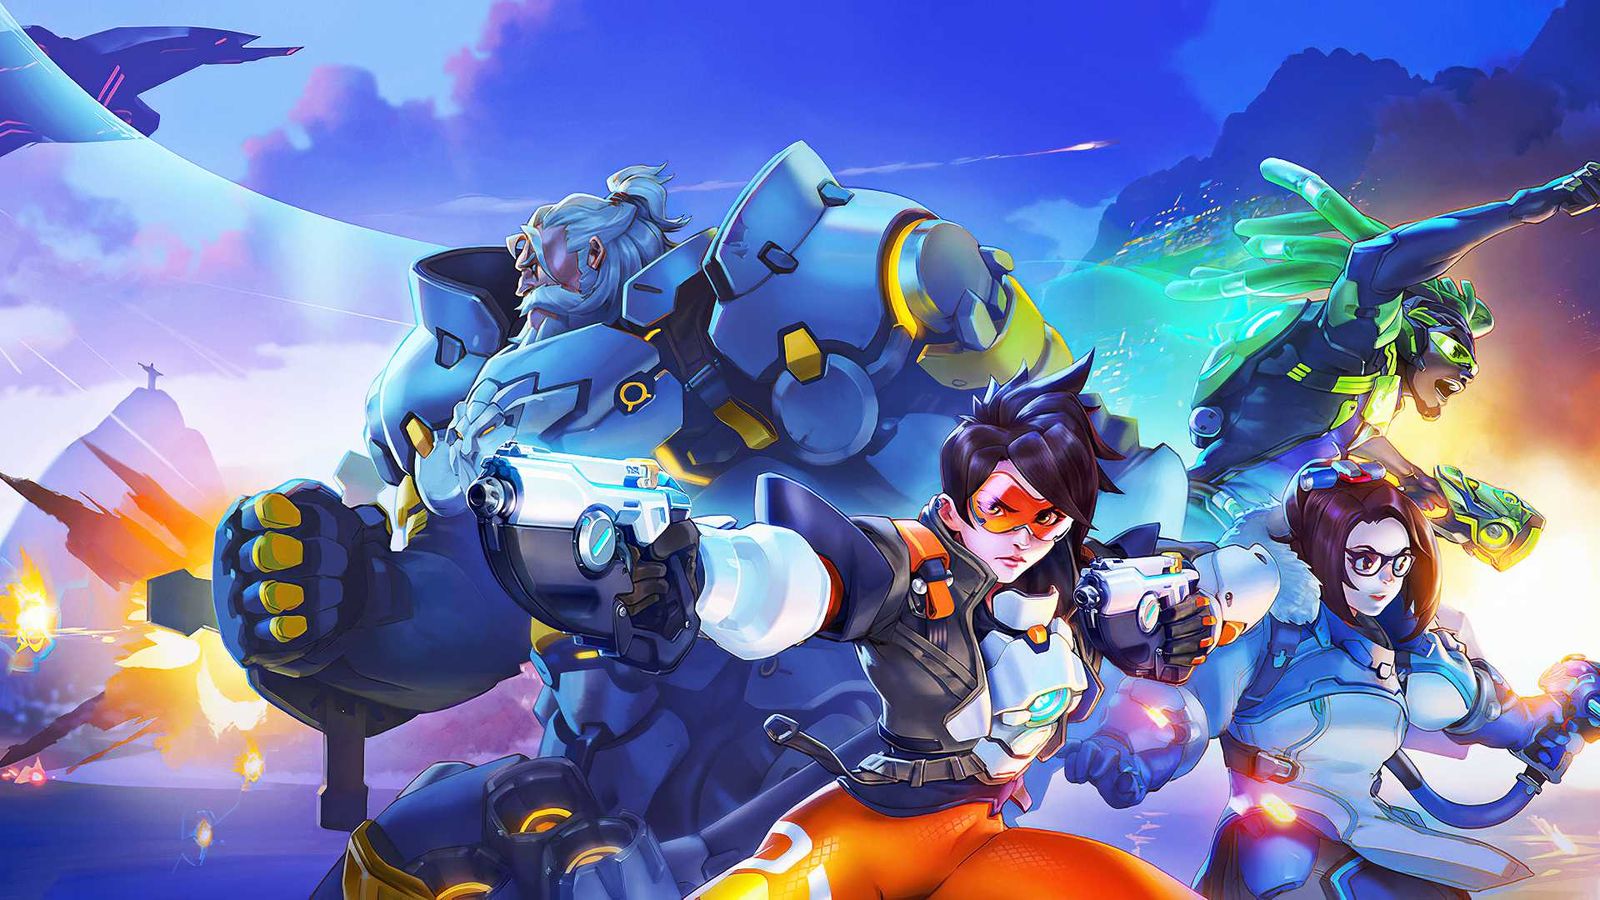 Overwatch 2 error starting game - picture of Overwatch 2 characters